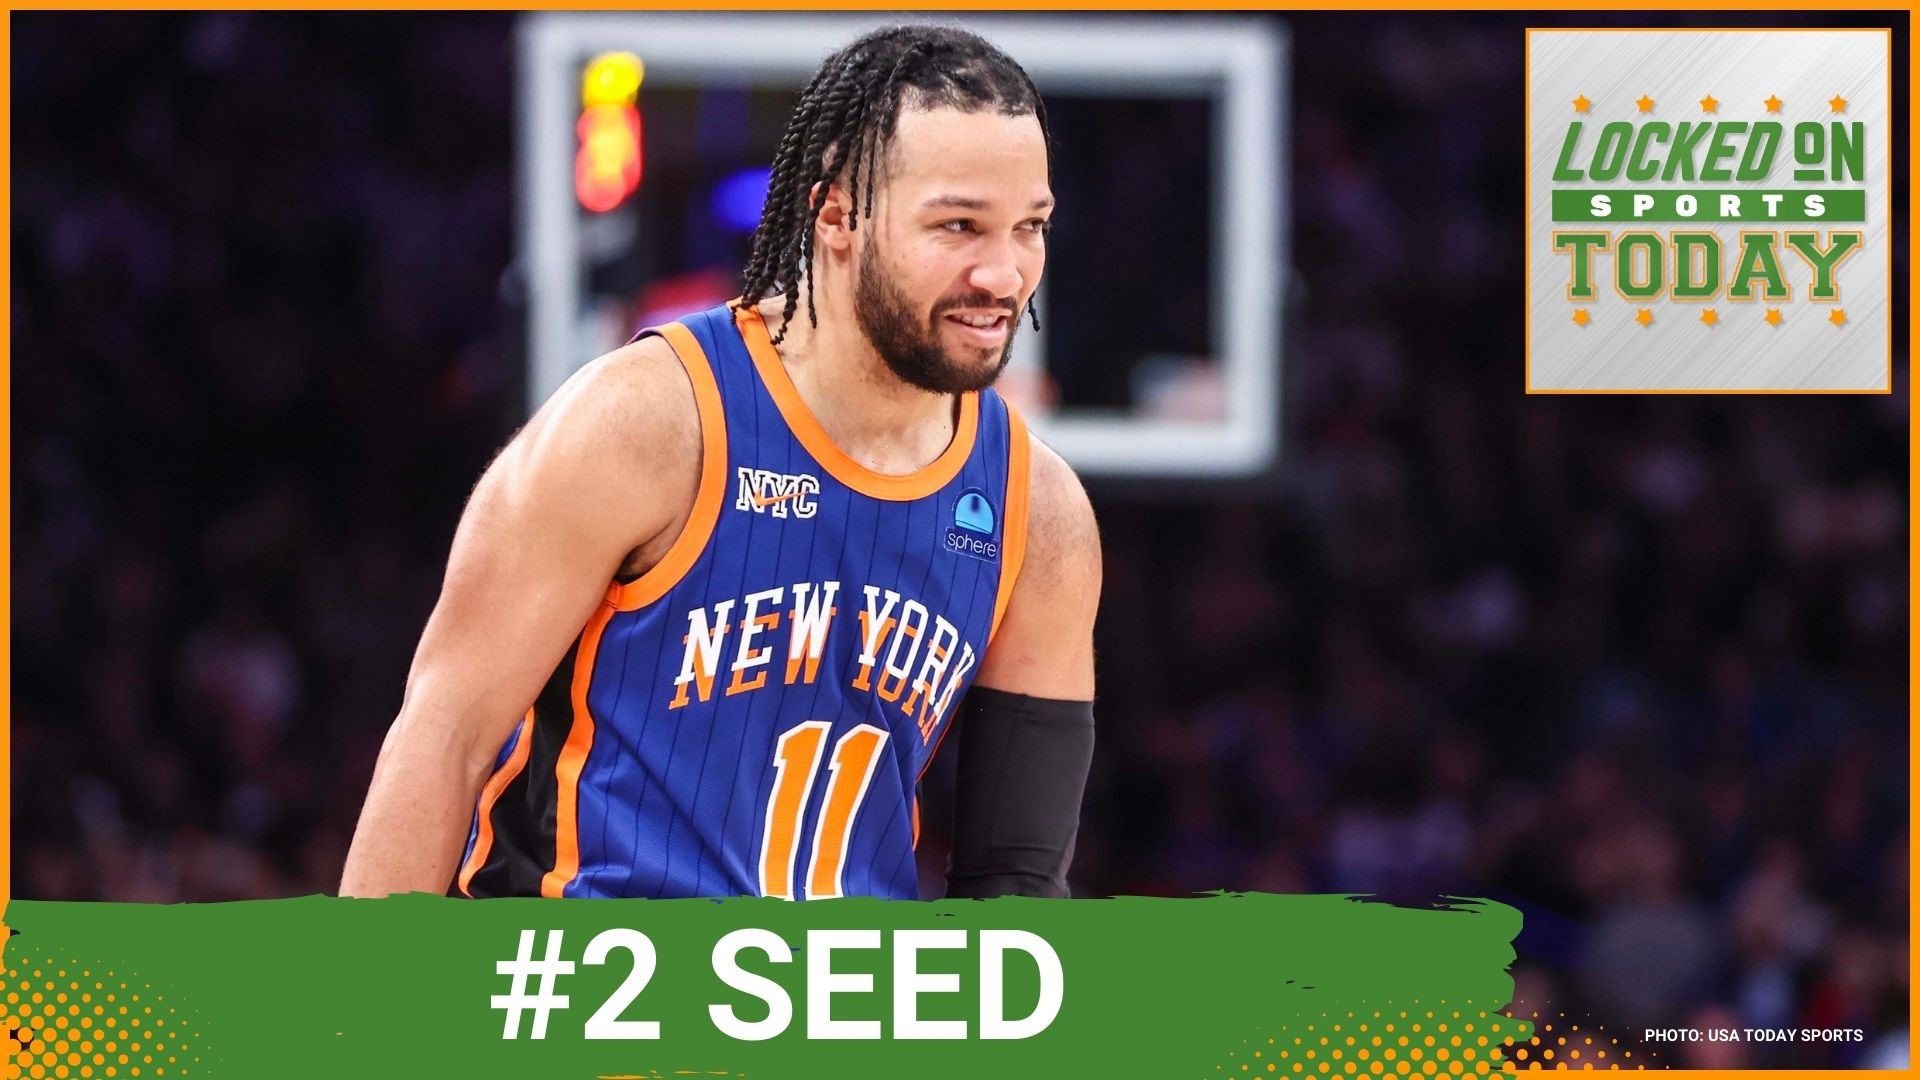 Discussing the day's top sport stories from the New York Knicks grabbing the #2 seed to the youngest top seed ever in the NBA and Scheffler's Masters win.